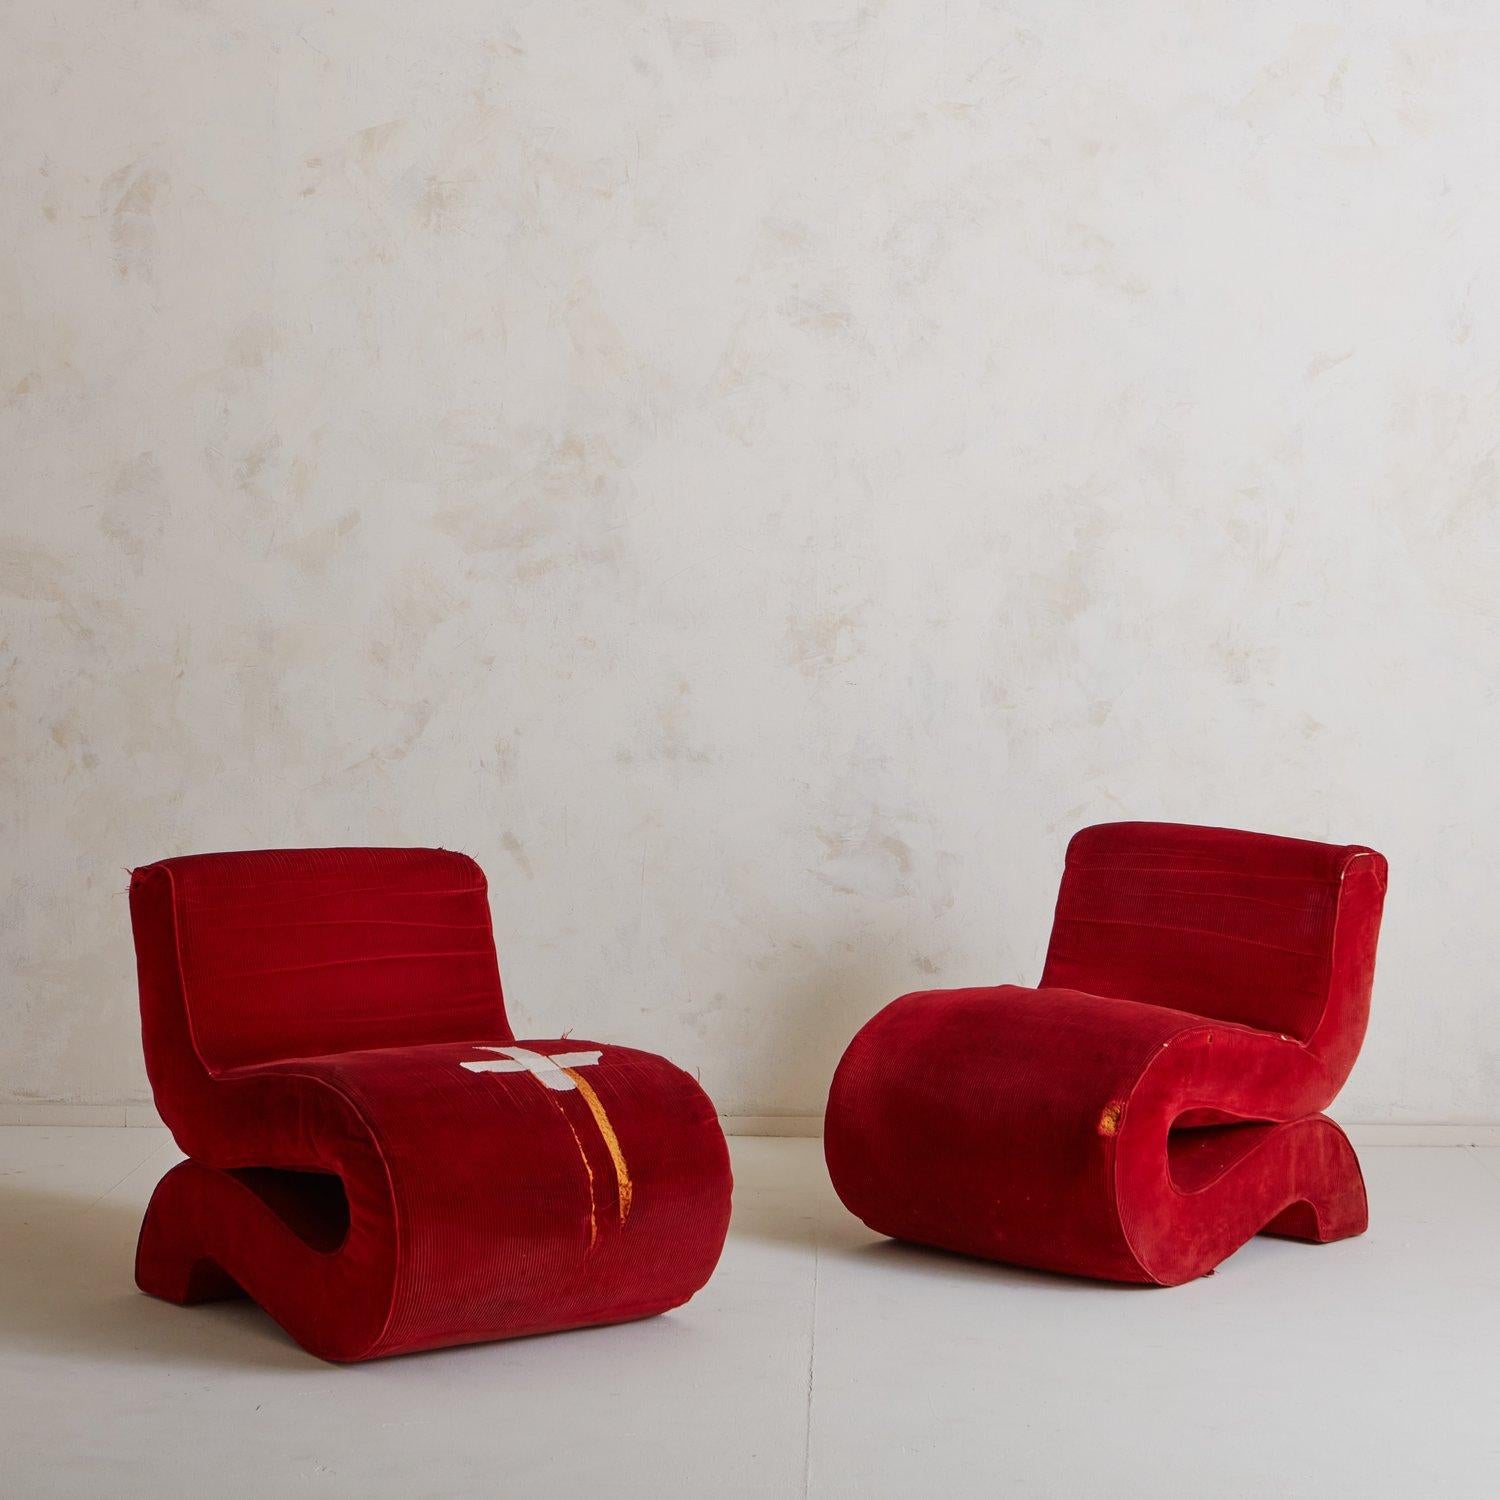 A pair of ‘Noodle’ chairs designed by Augusto Betti for Habitat Faenza in 1967. These chairs feature a unique curved profile and retain their original red corduroy fabric. Unmarked. Sourced in Italy, 1960s.

Augusto Betti (1919-2013) was an